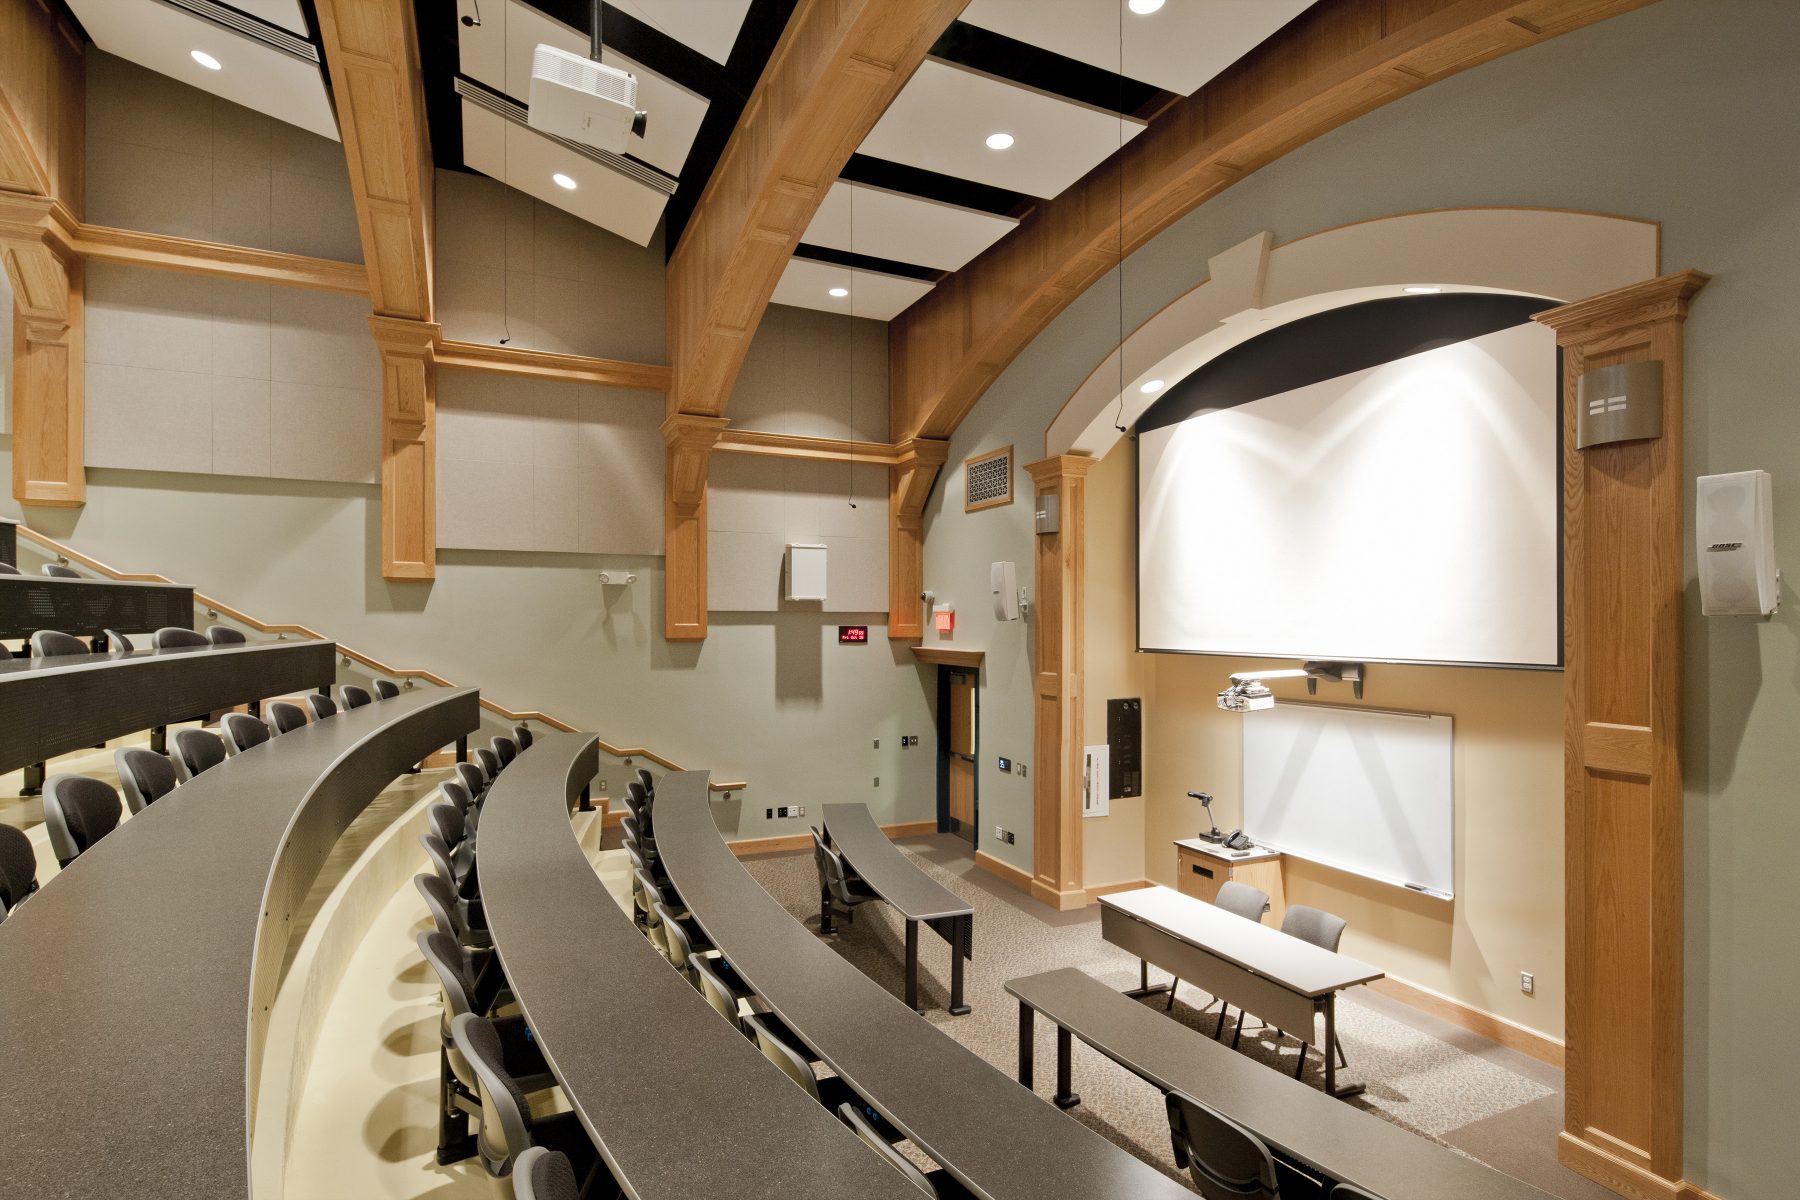 Natick High School Lecture Hall